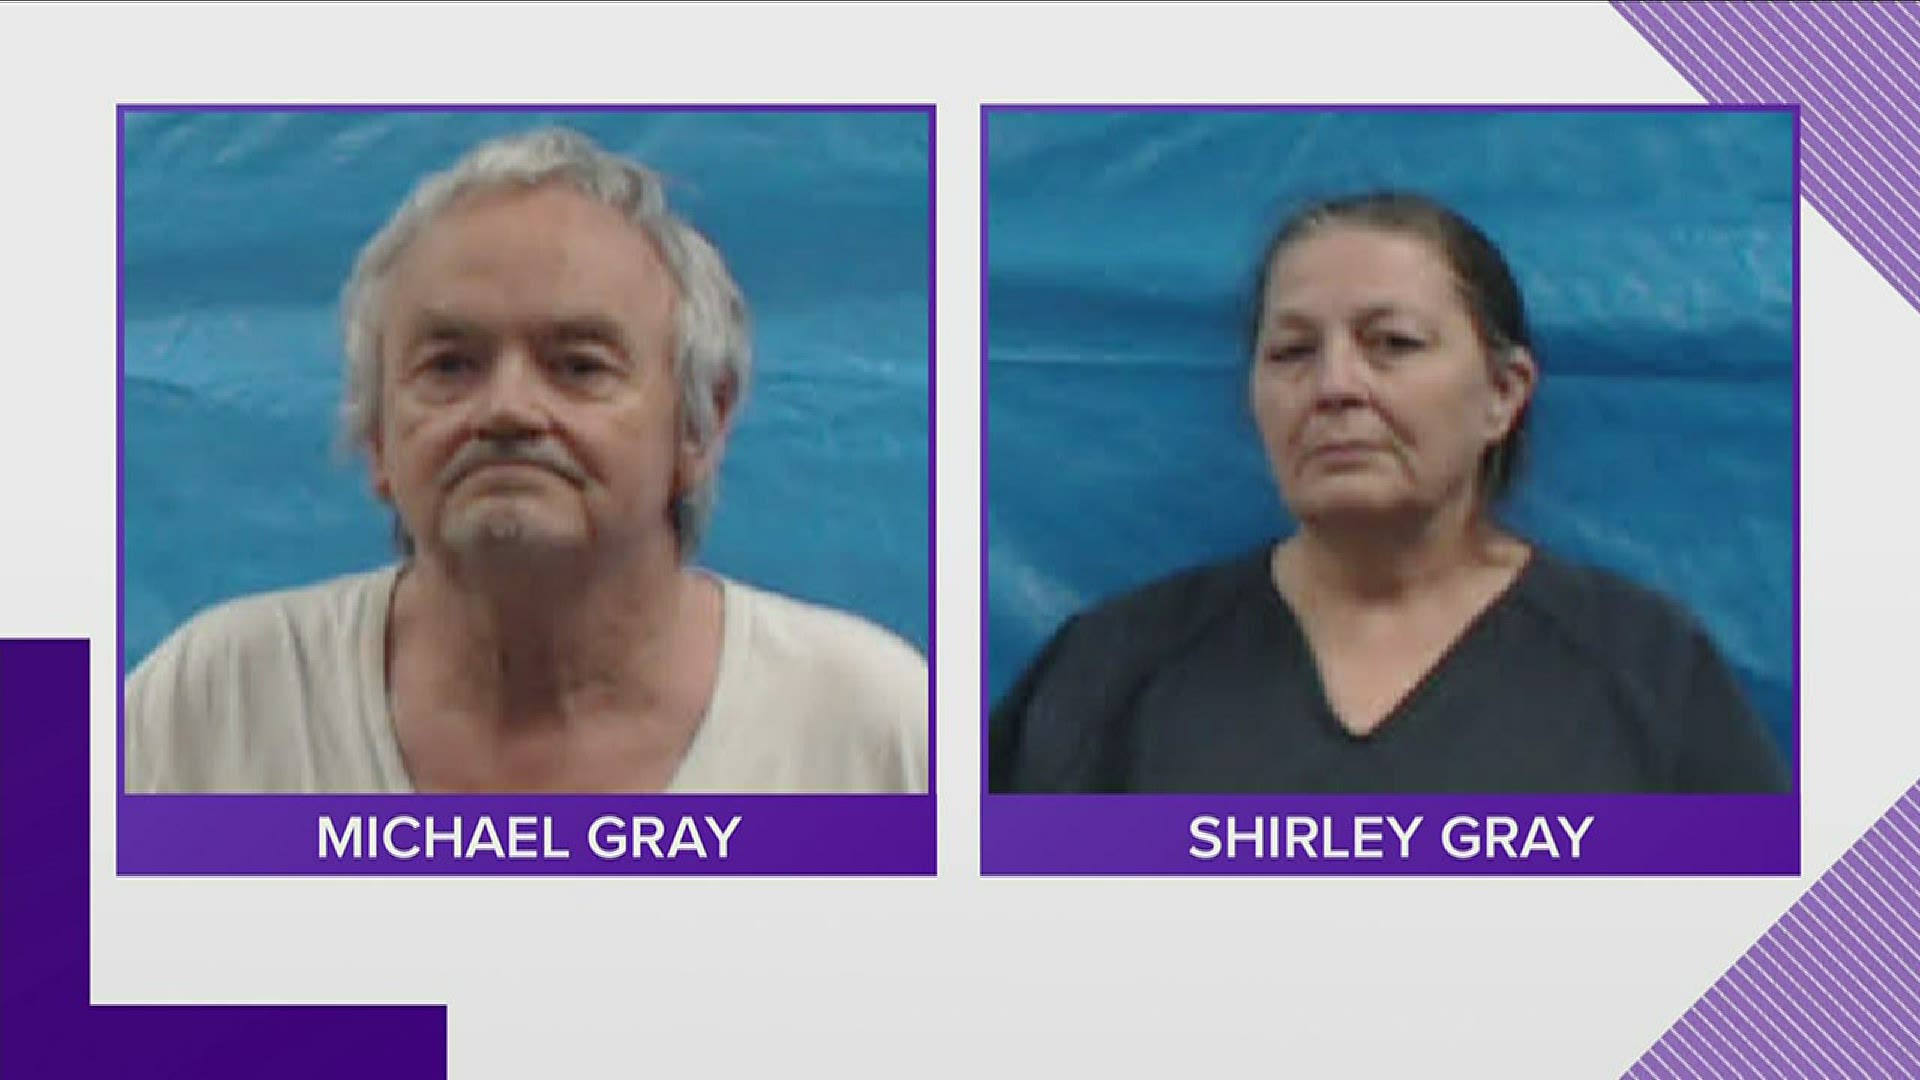 Authorities say Michael and Shirley Grey locked children in the basement of their home for years.